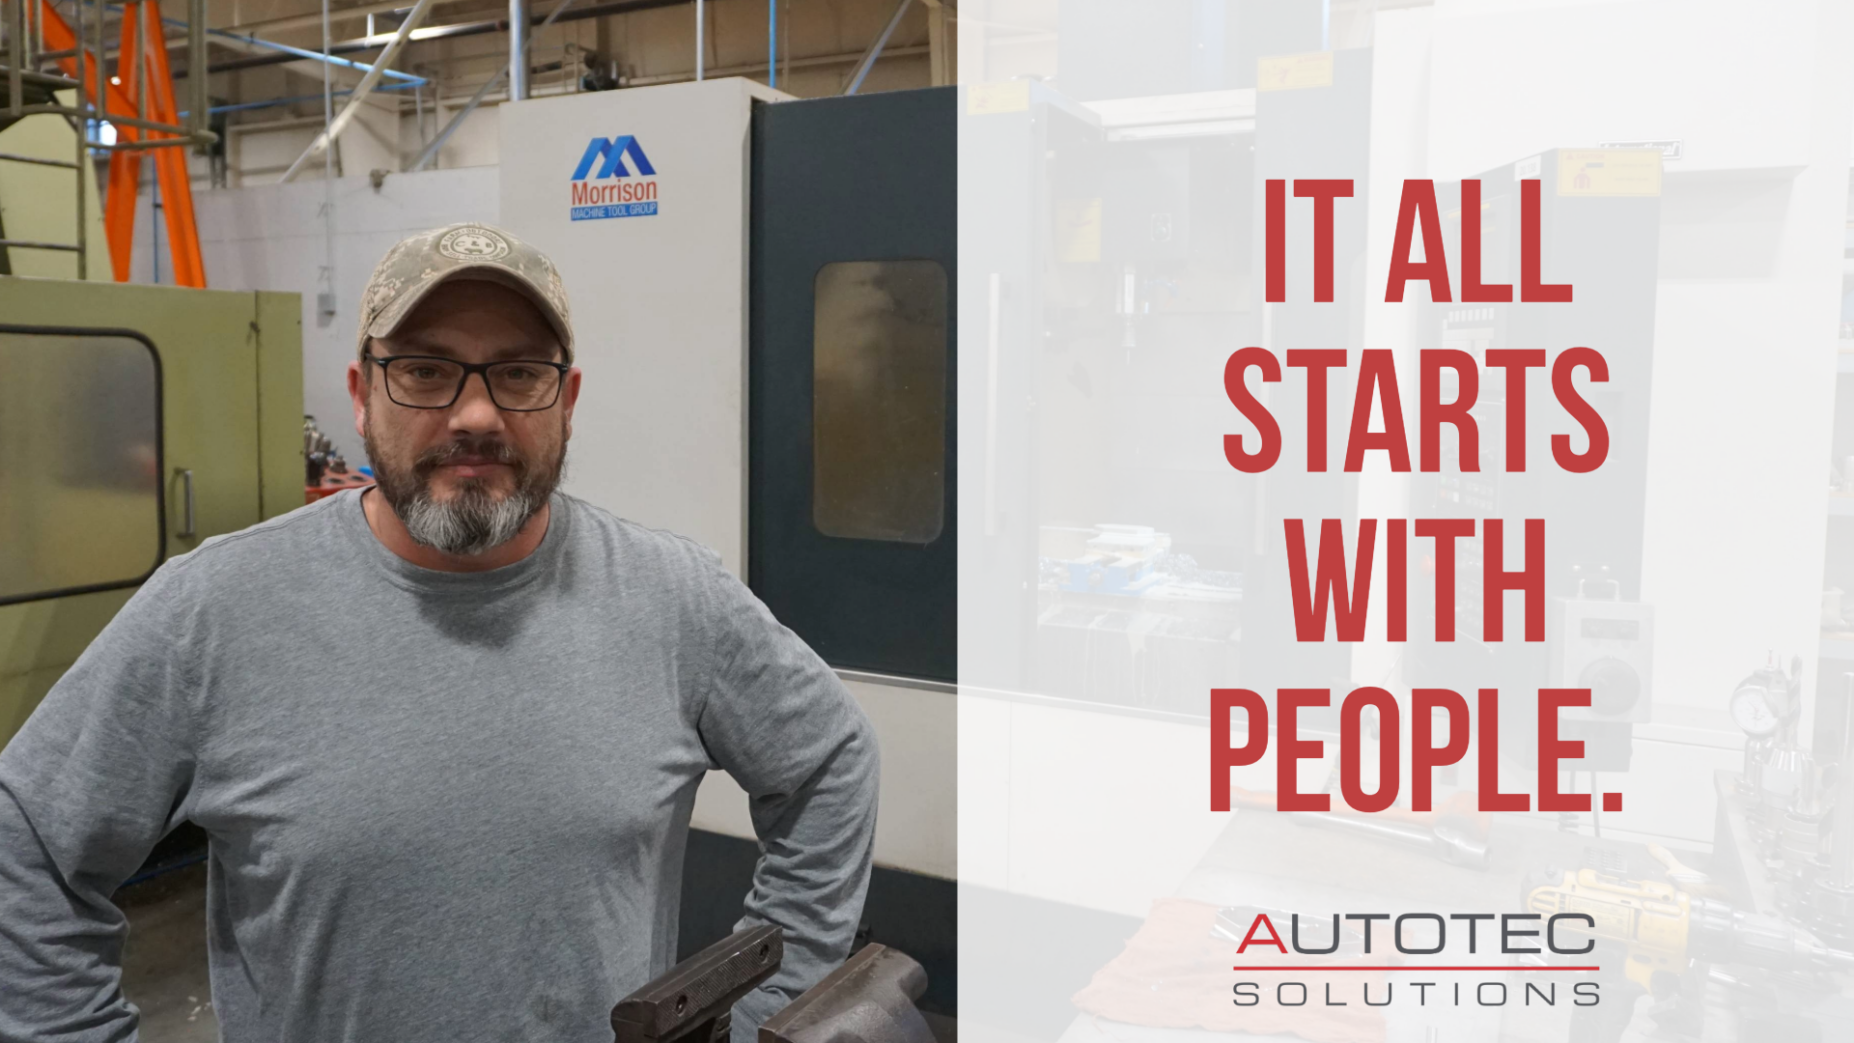 let's take a moment to recognize John. His steady demonstration of competency and commitment has played a significant role in our manufacturing triumphs. #ManufacturingExcellence #Teamwork #autotecsolutions